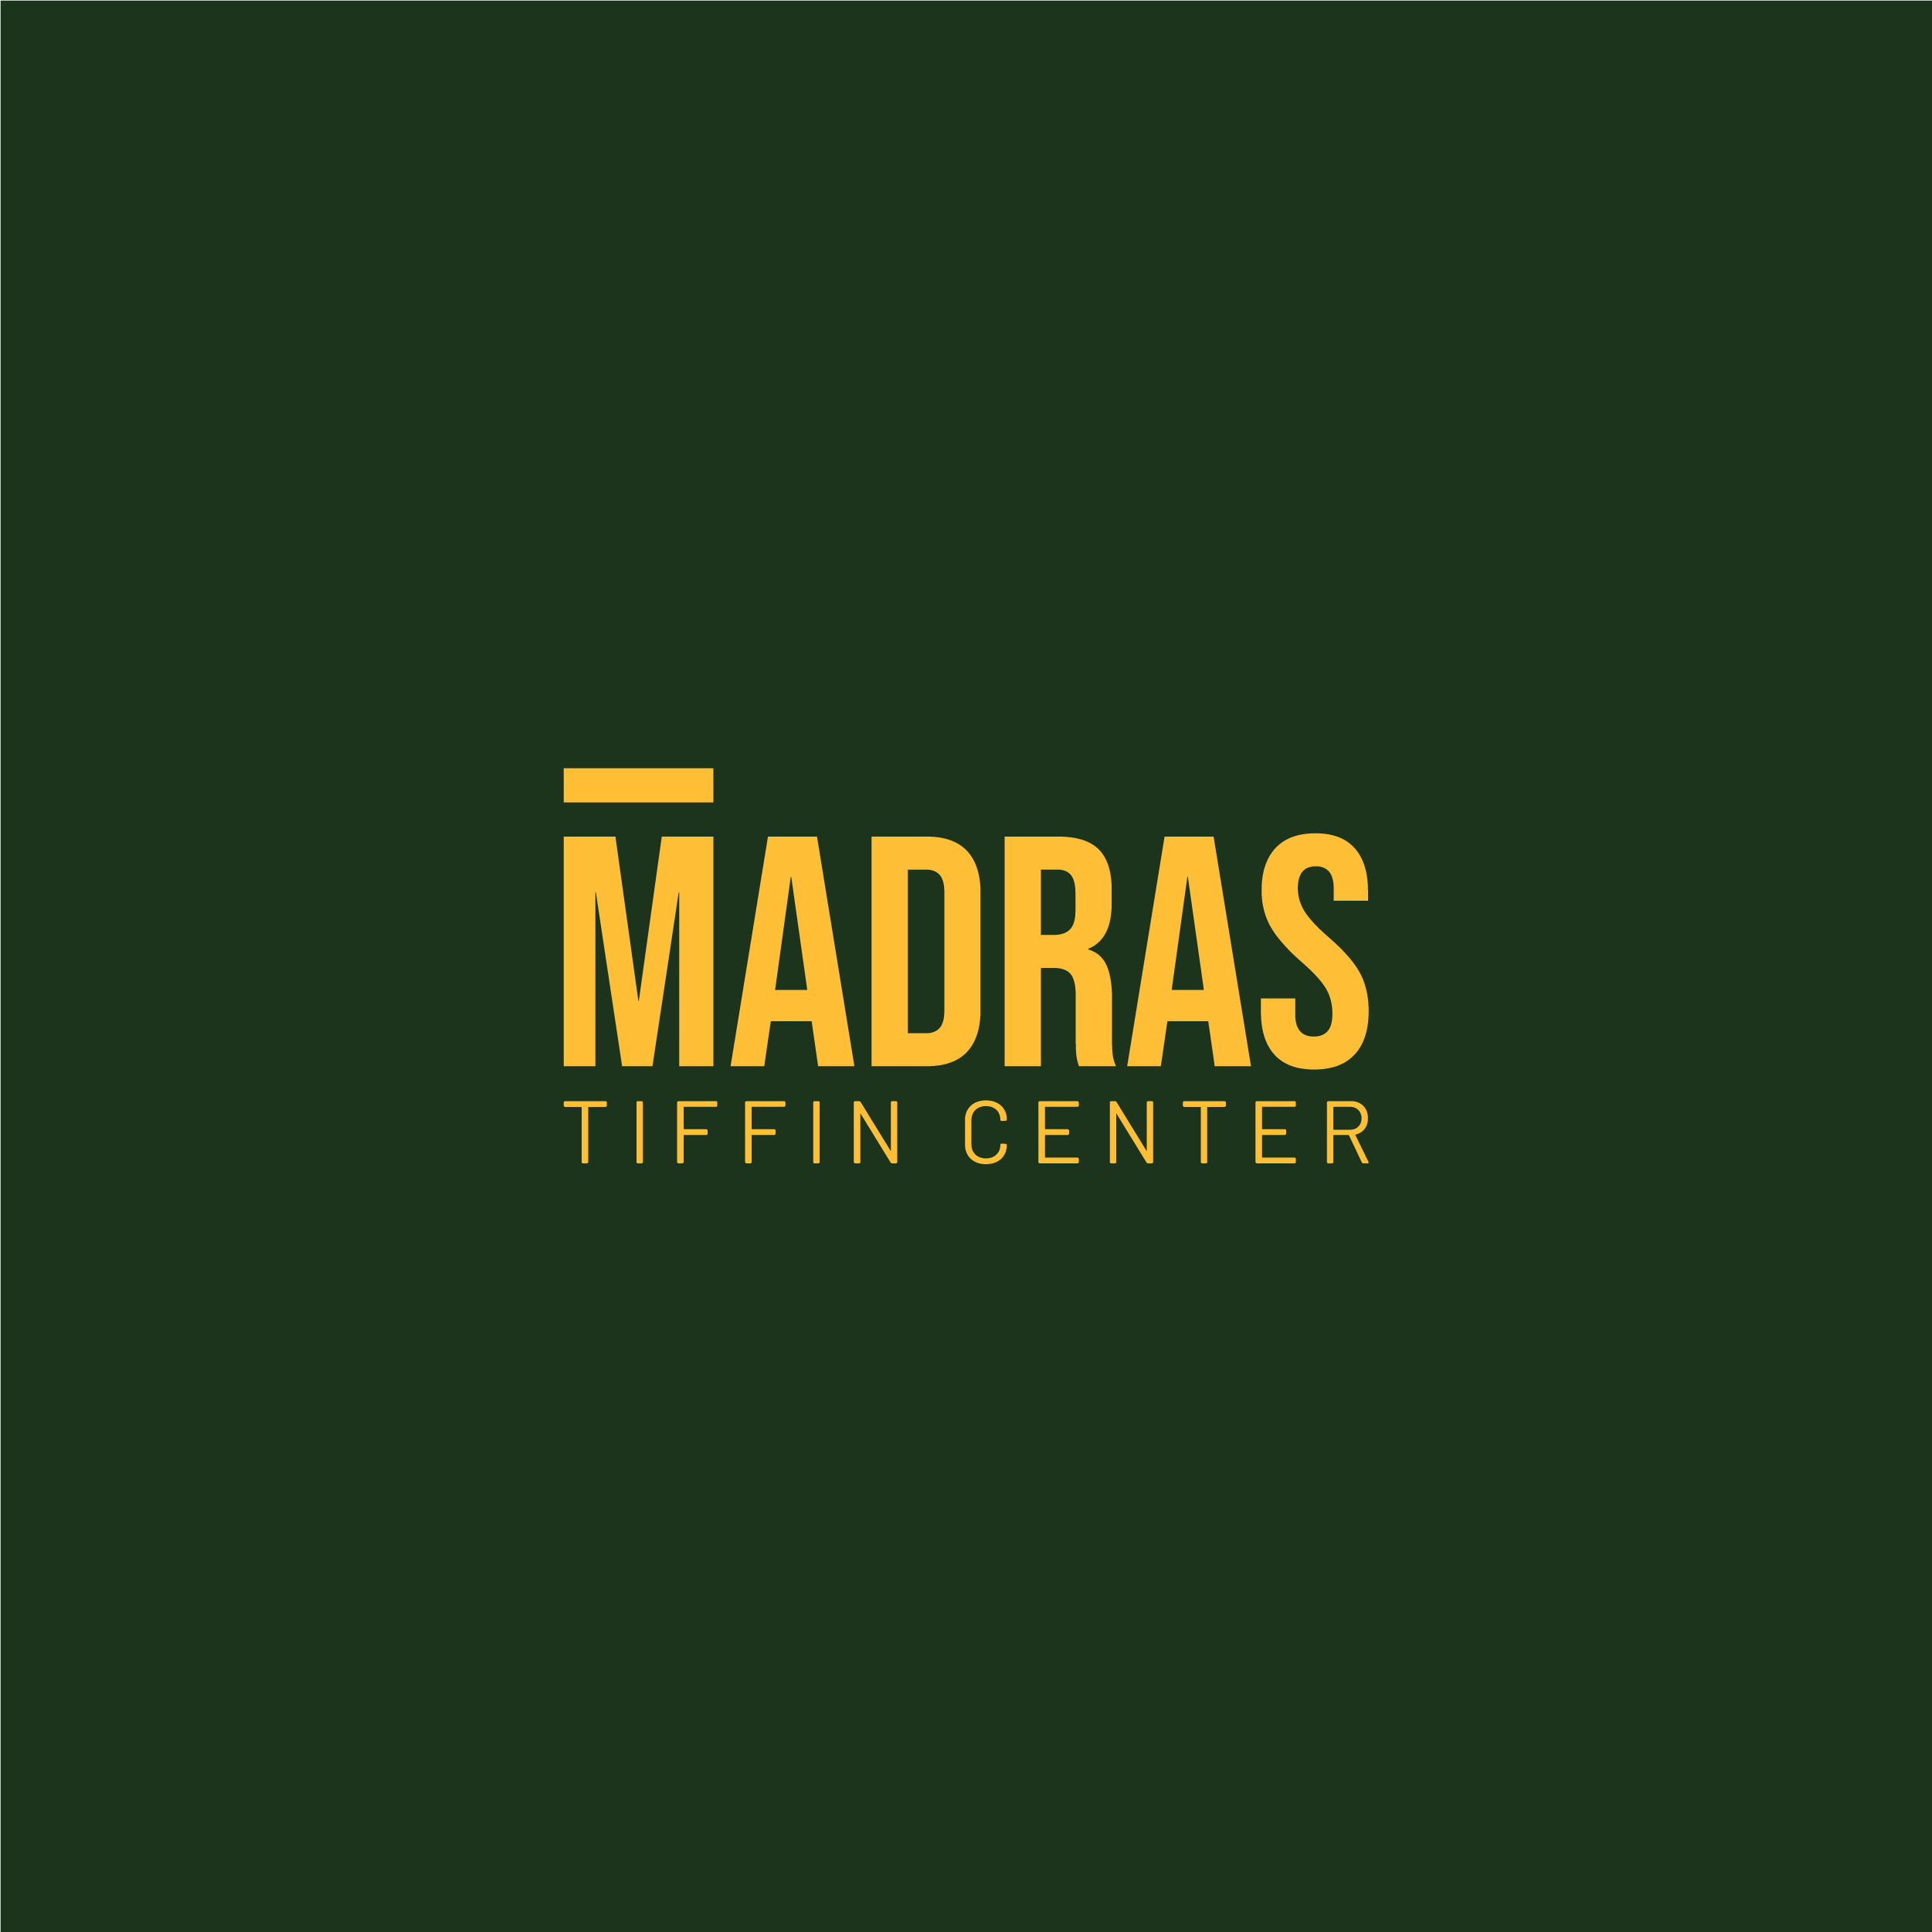 Brand Logo and Visual Identity for Madras Tiffin Service